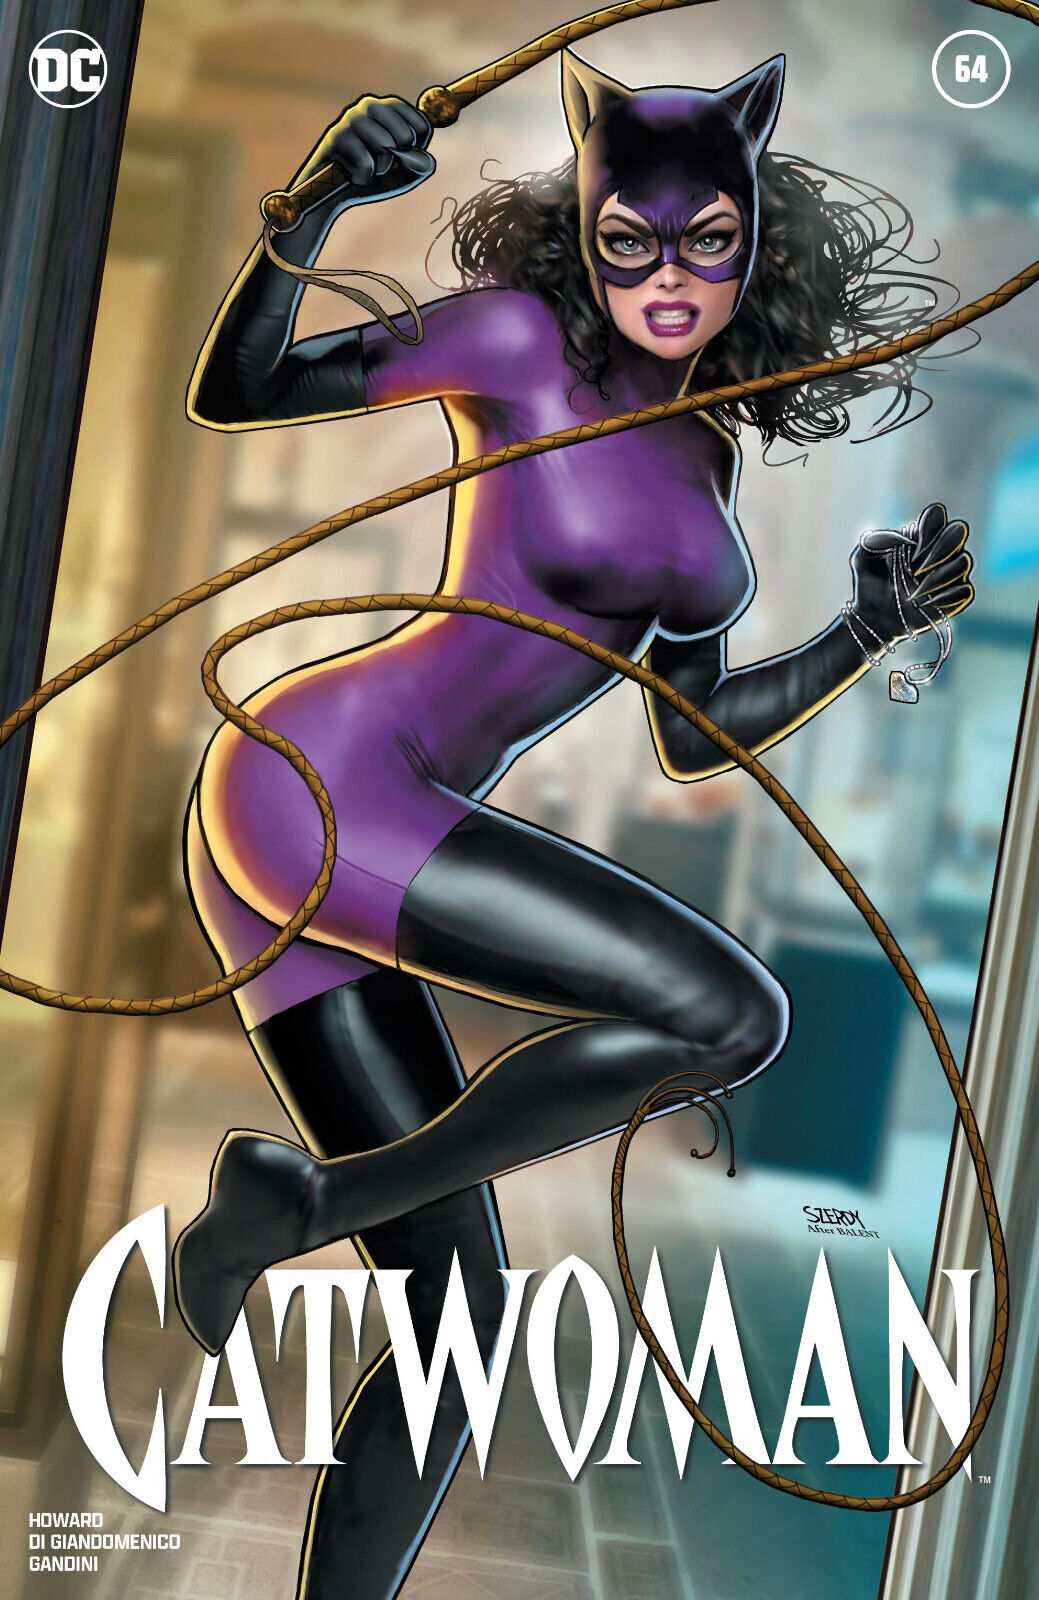 CATWOMAN #64 (NATHAN SZERDY EXCLUSIVE VARIANT) COMIC BOOK ~ DC